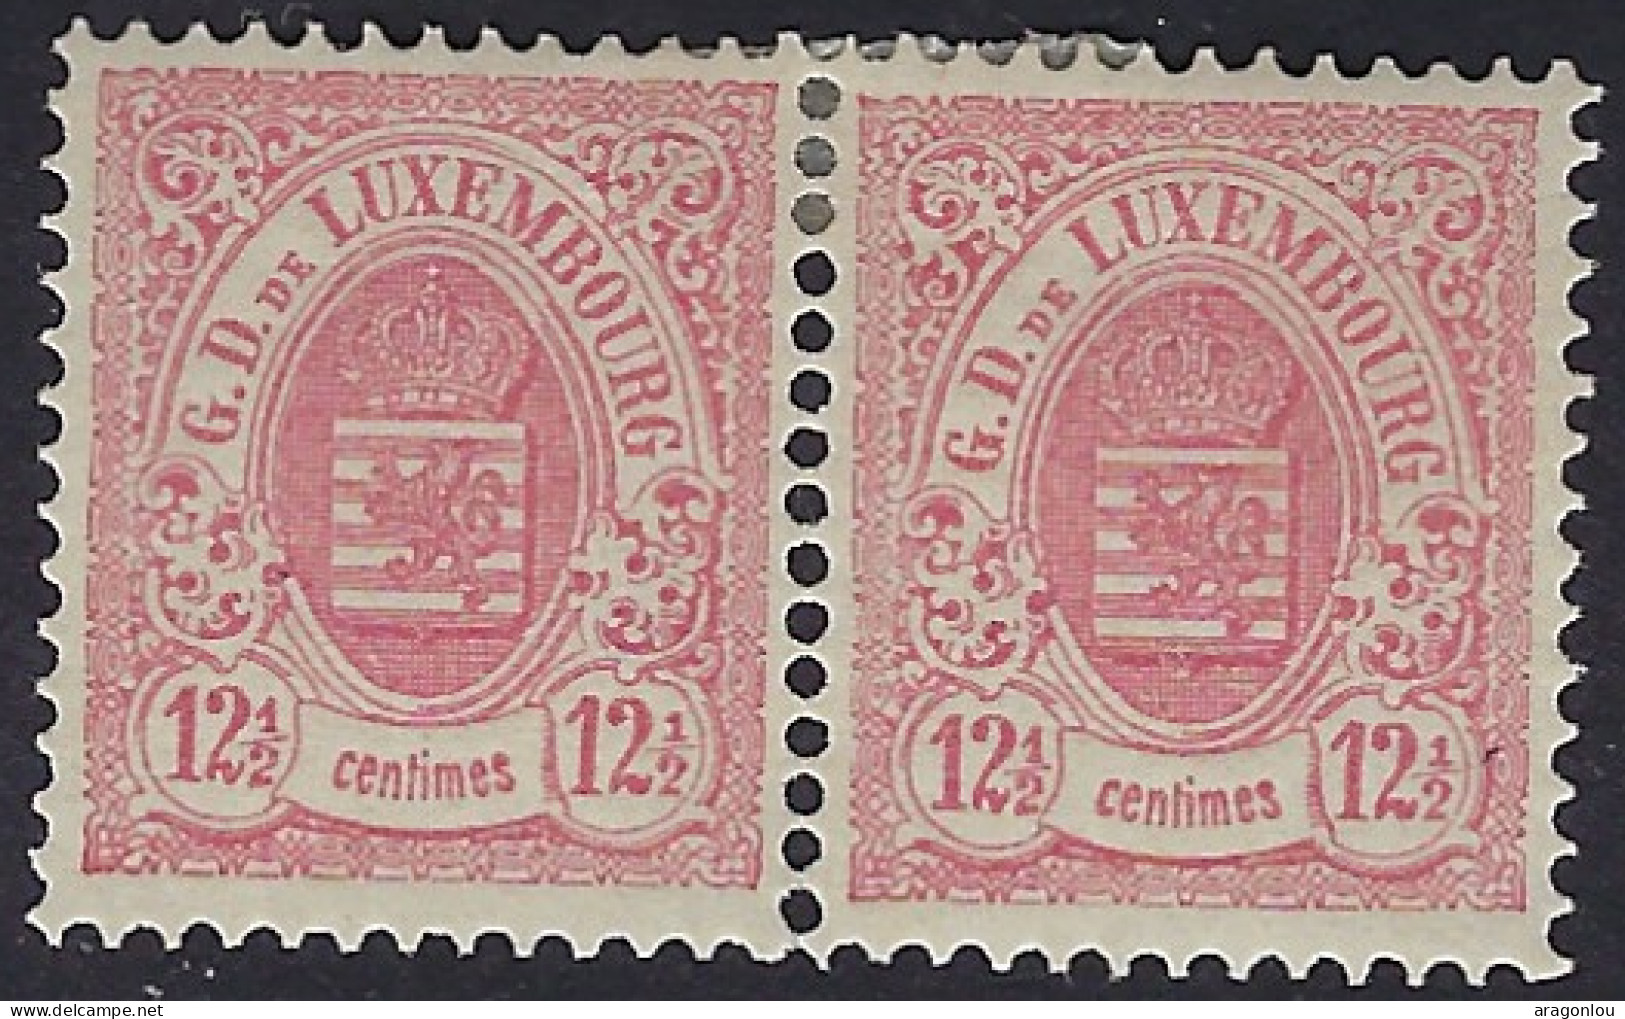 Luxembourg - Luxemburg - Timbres - Armoires 1880    12,5C.    *    1 Paire     Michel 41 D - 1859-1880 Coat Of Arms